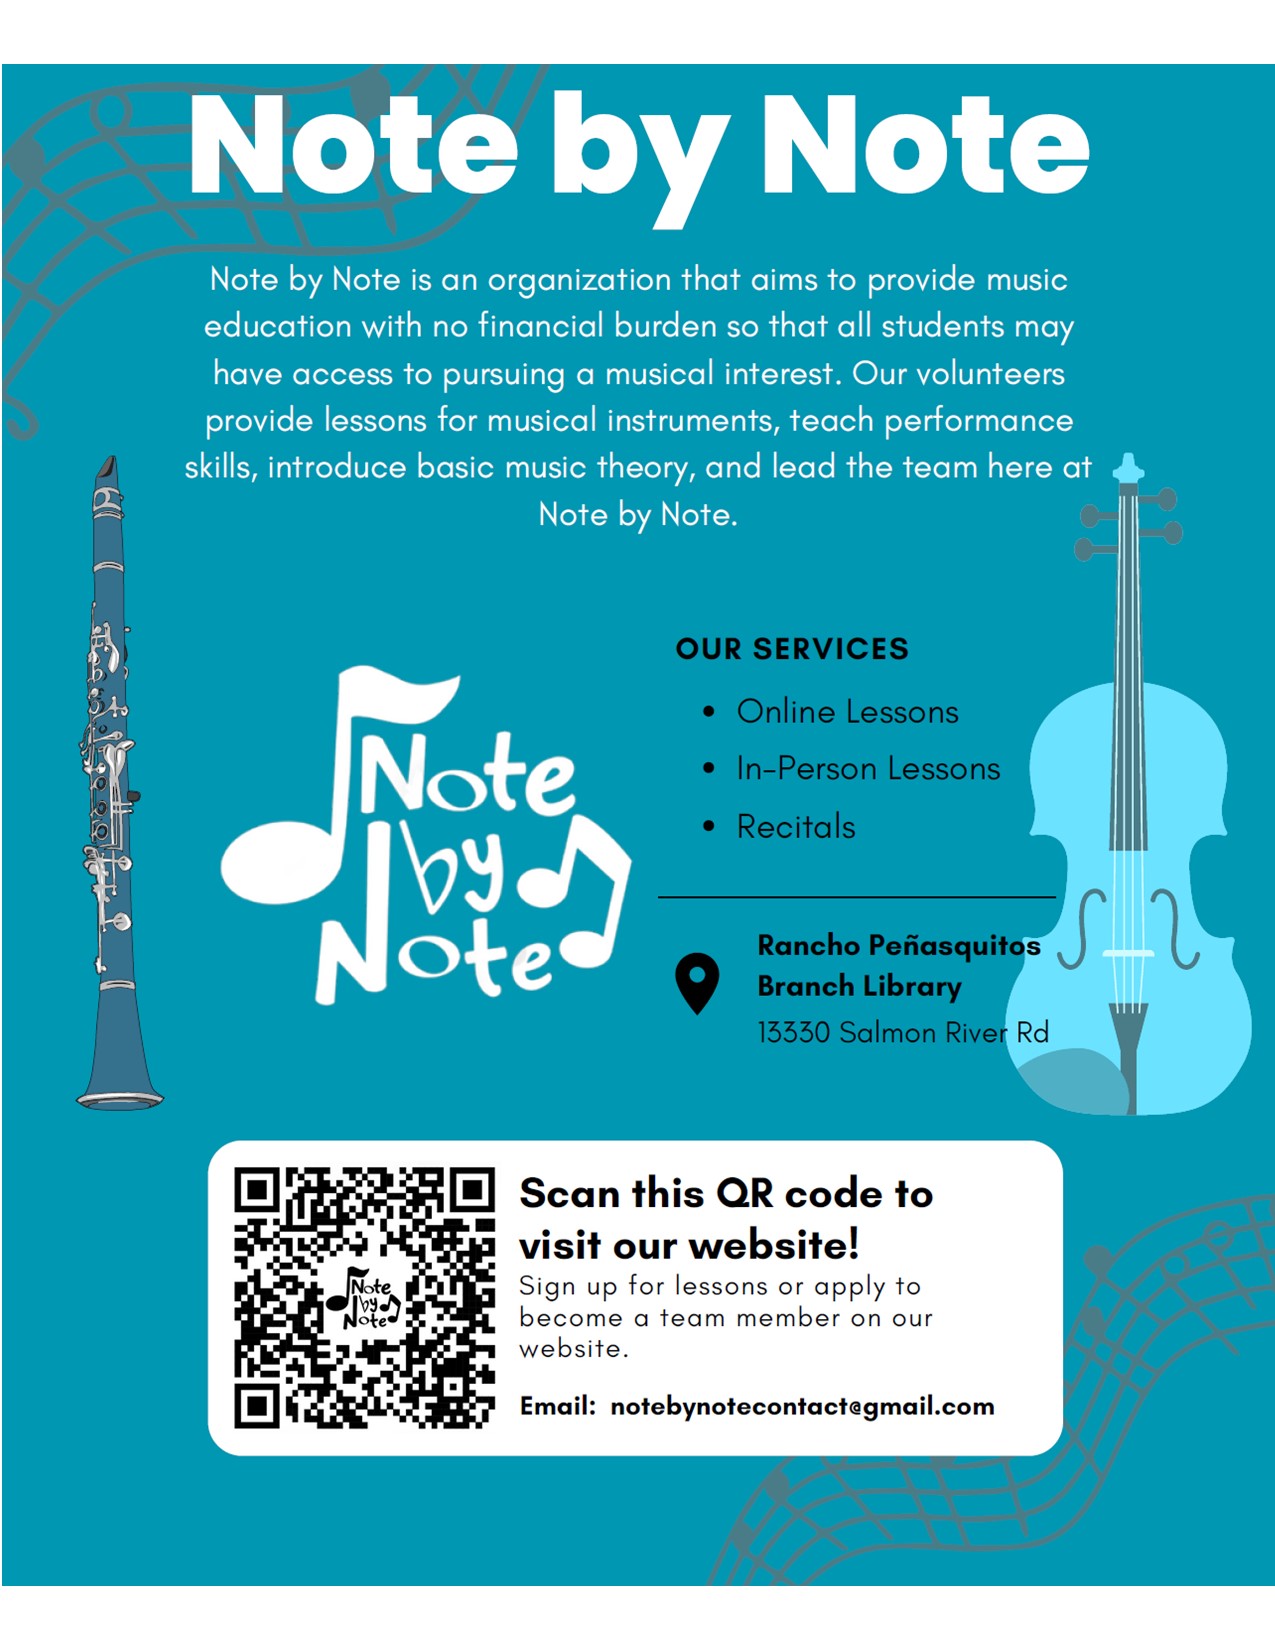 flyer describing the organization called Note by Note